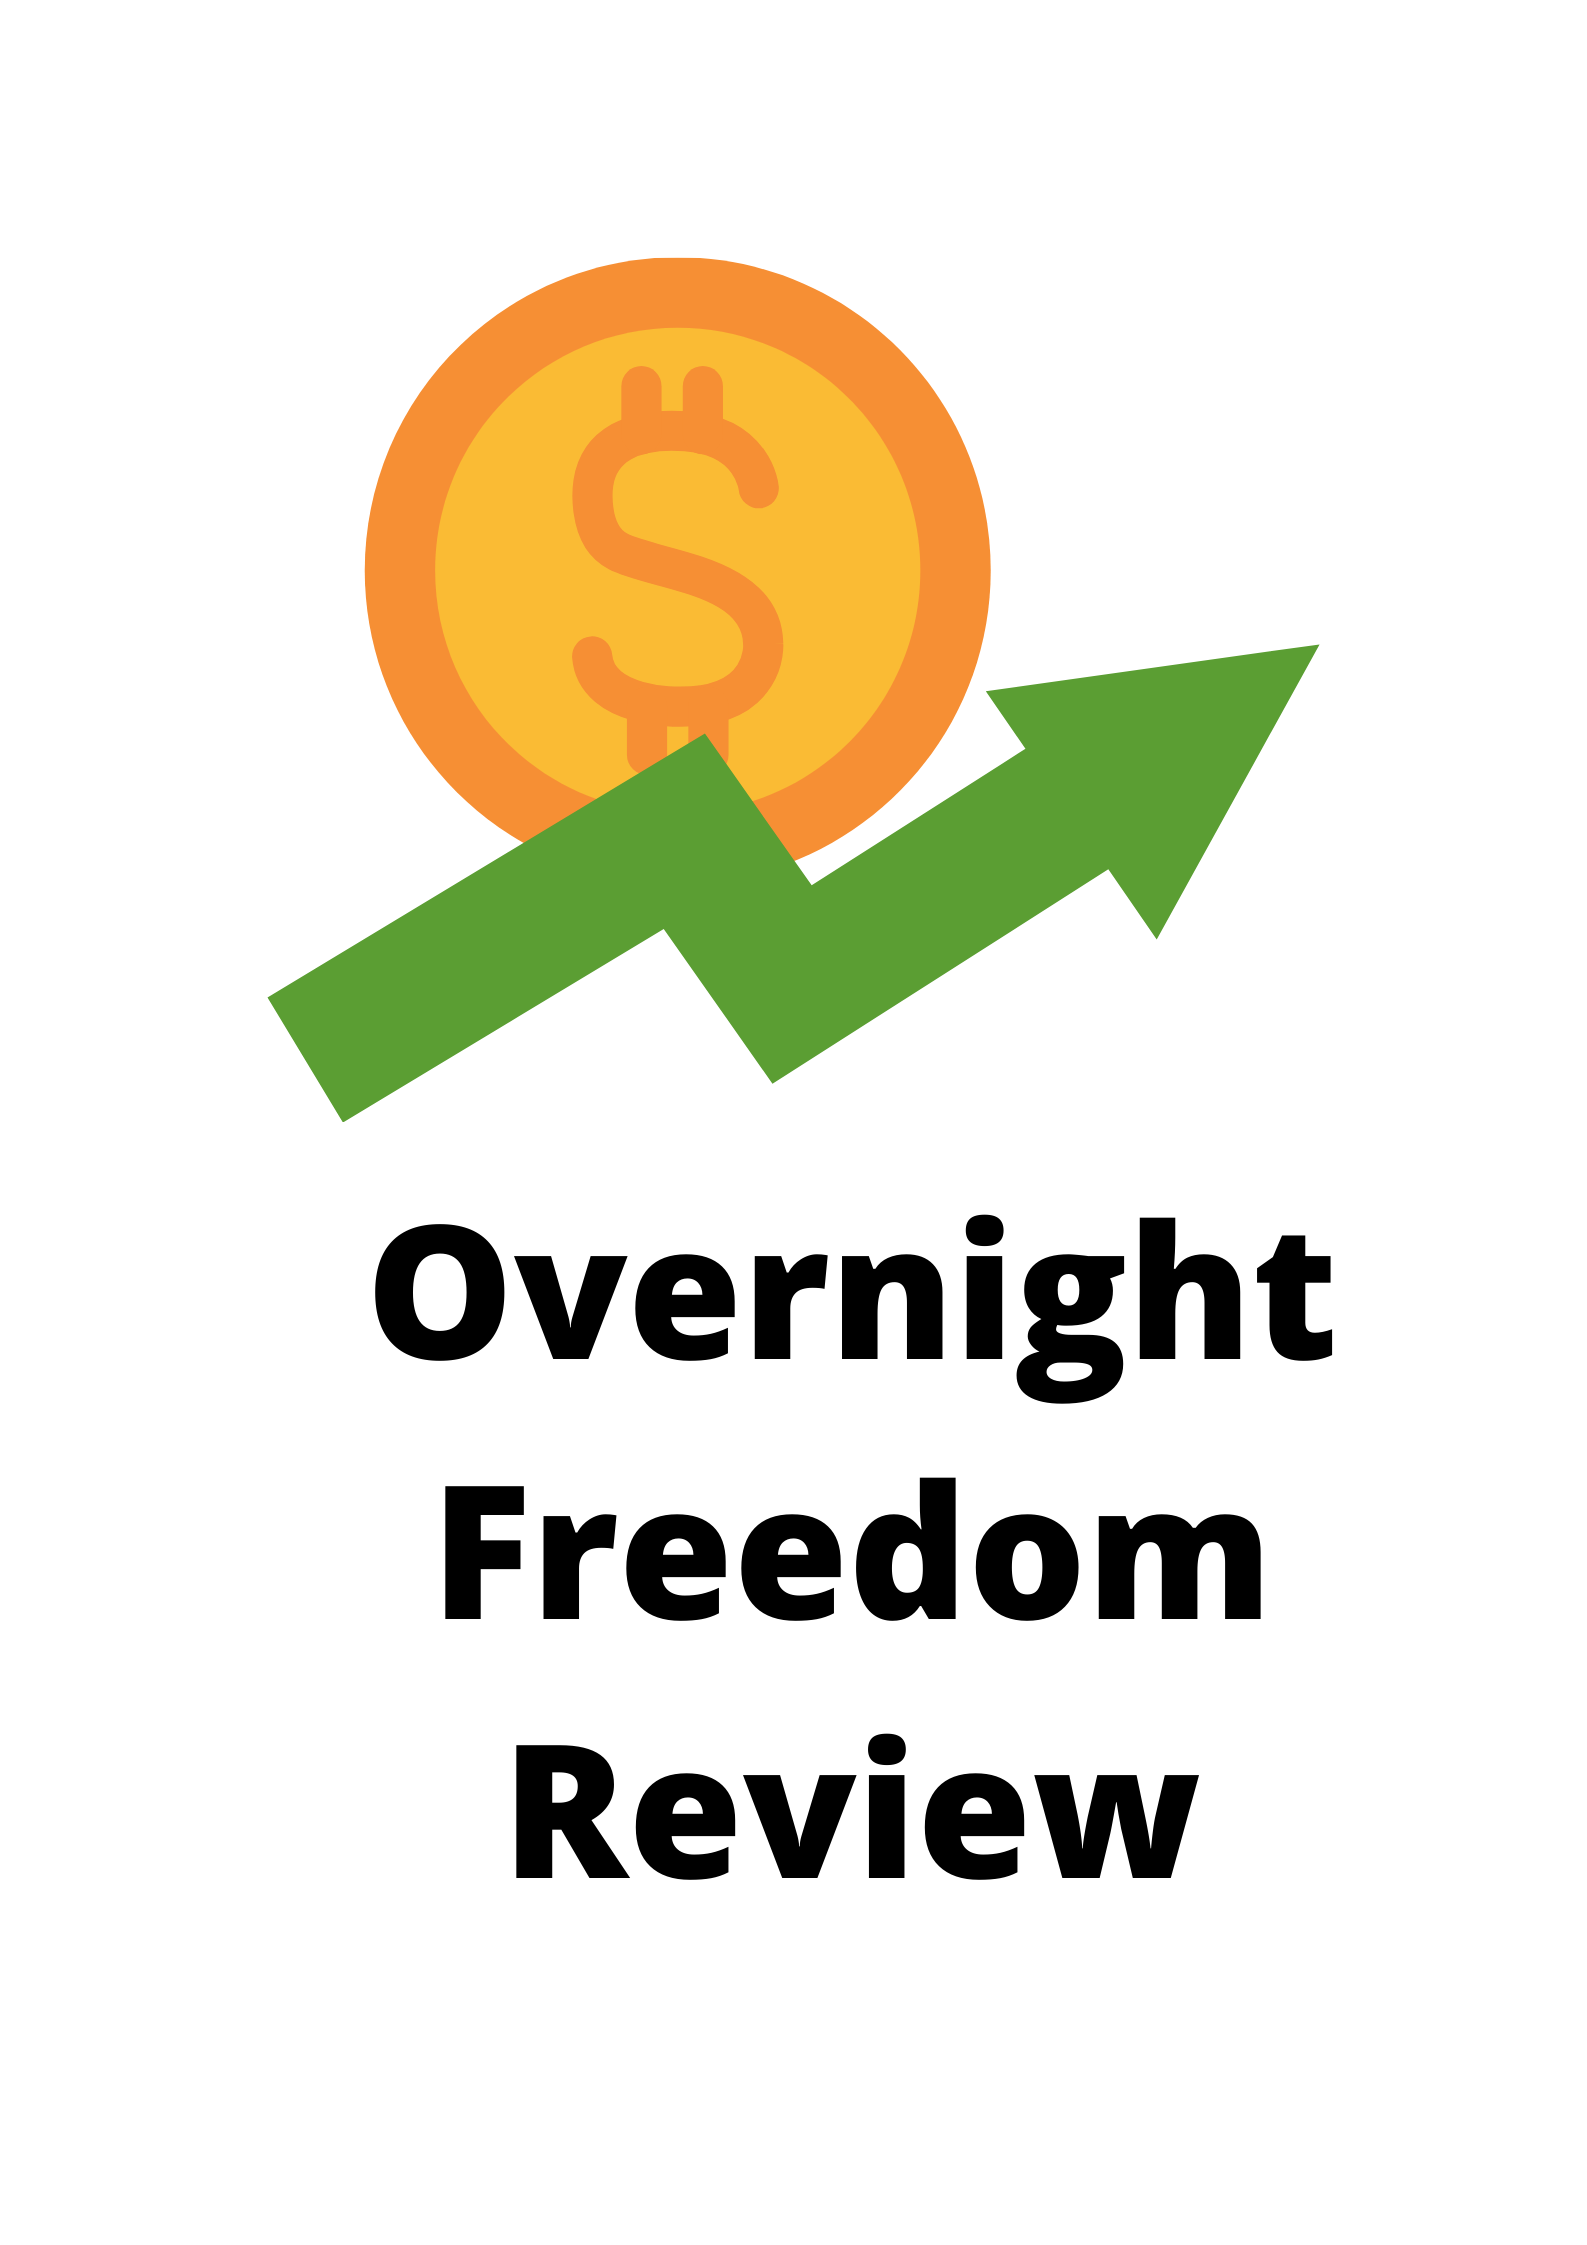 Overnight Freedom Review